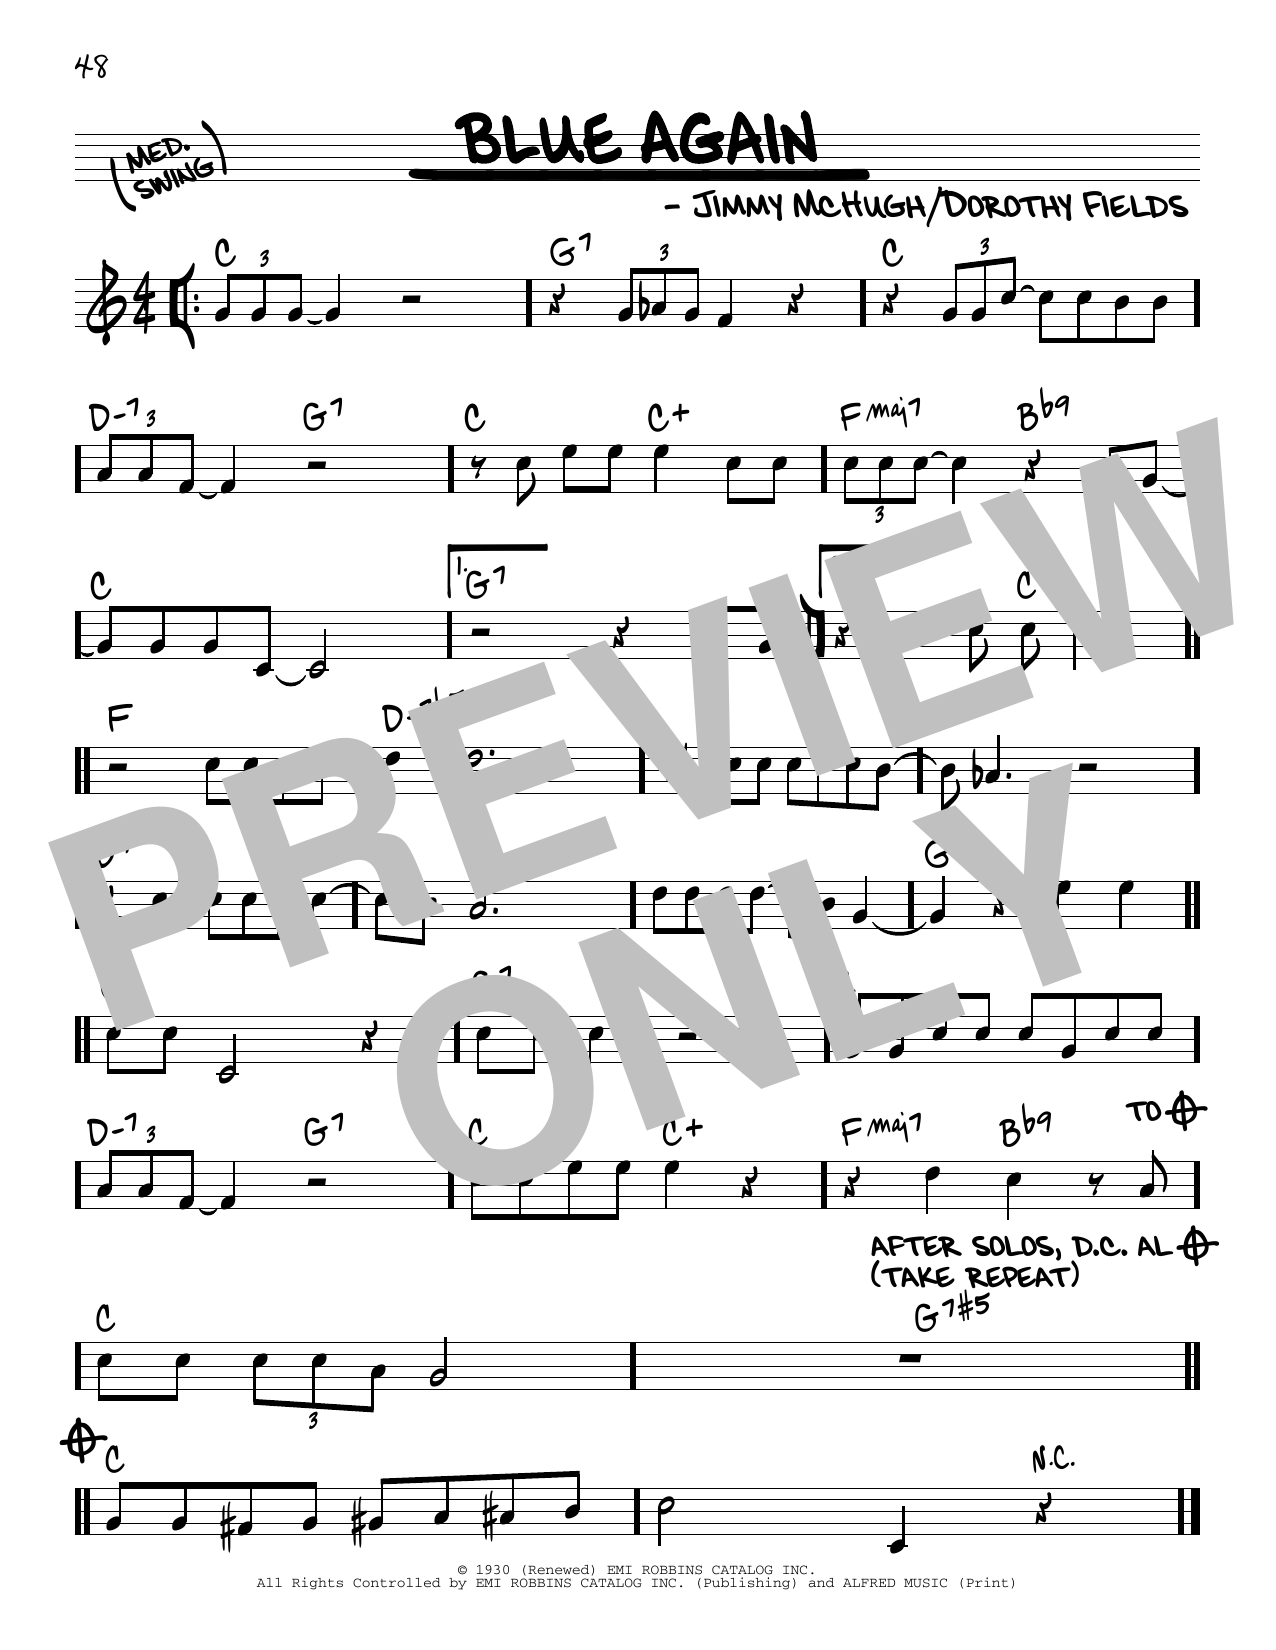 Download Jimmy McHugh and Dorothy Fields Blue Again Sheet Music